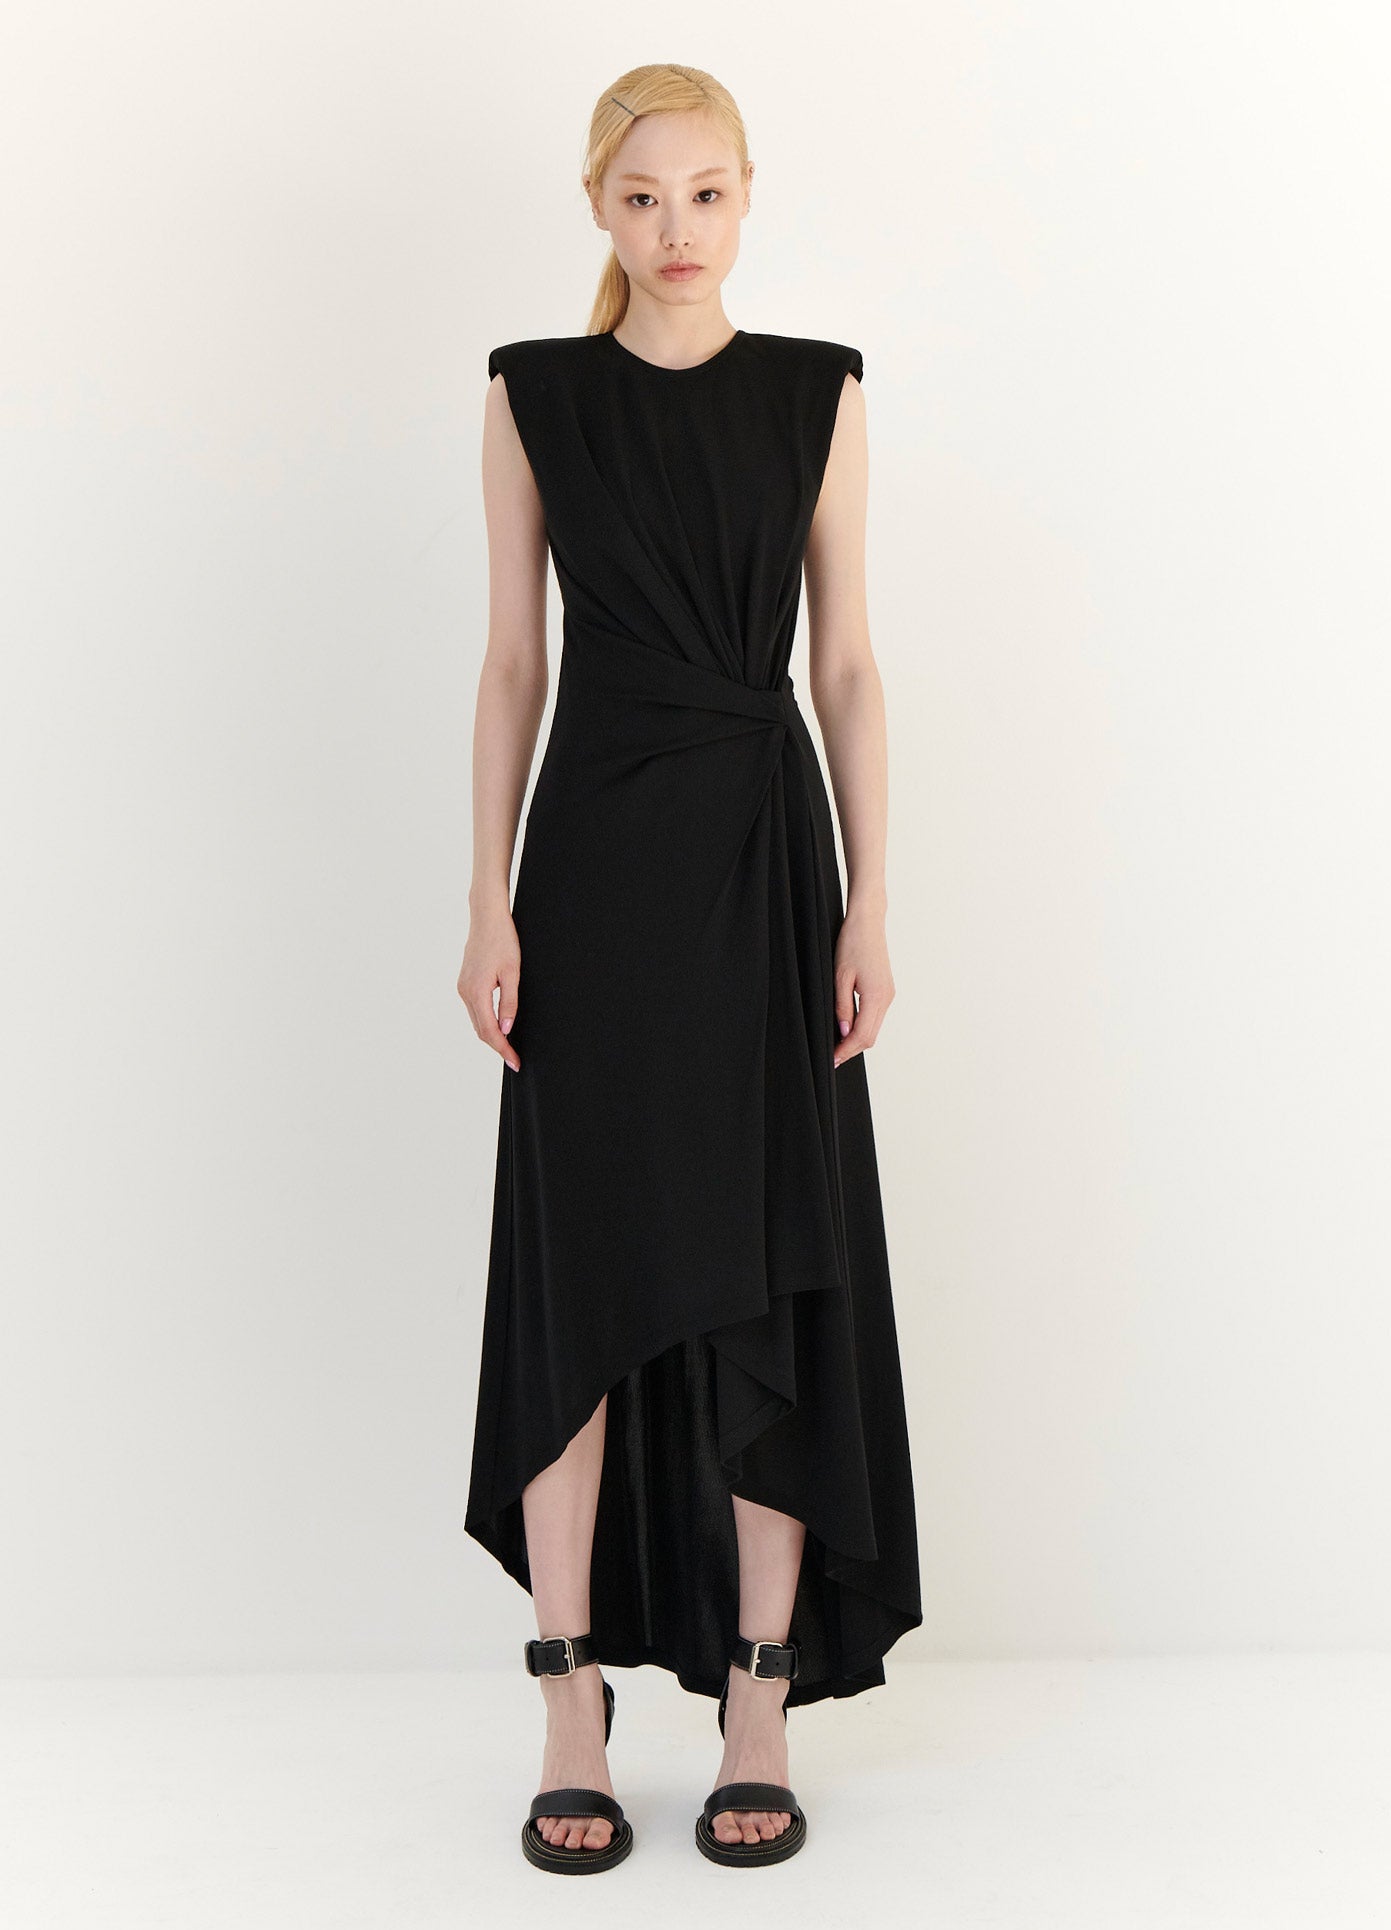 MONSE Gathered Power Shoulder Dress in Black on Model Main Full Front View